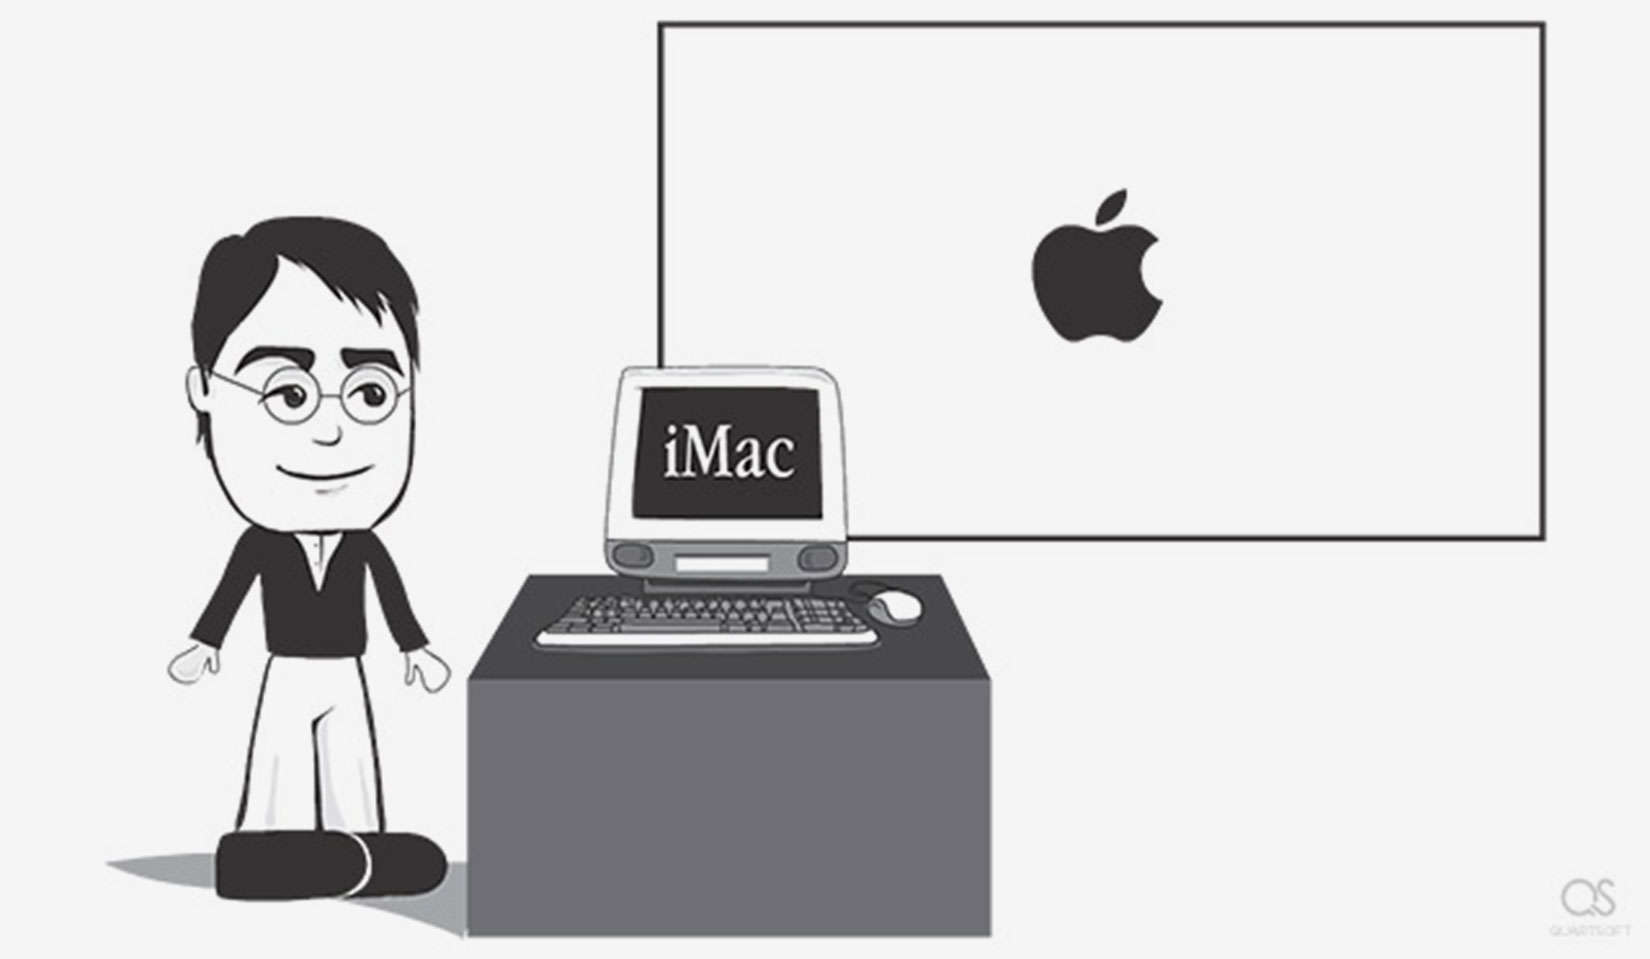 Steven Jobs and the introduction of the iMac.